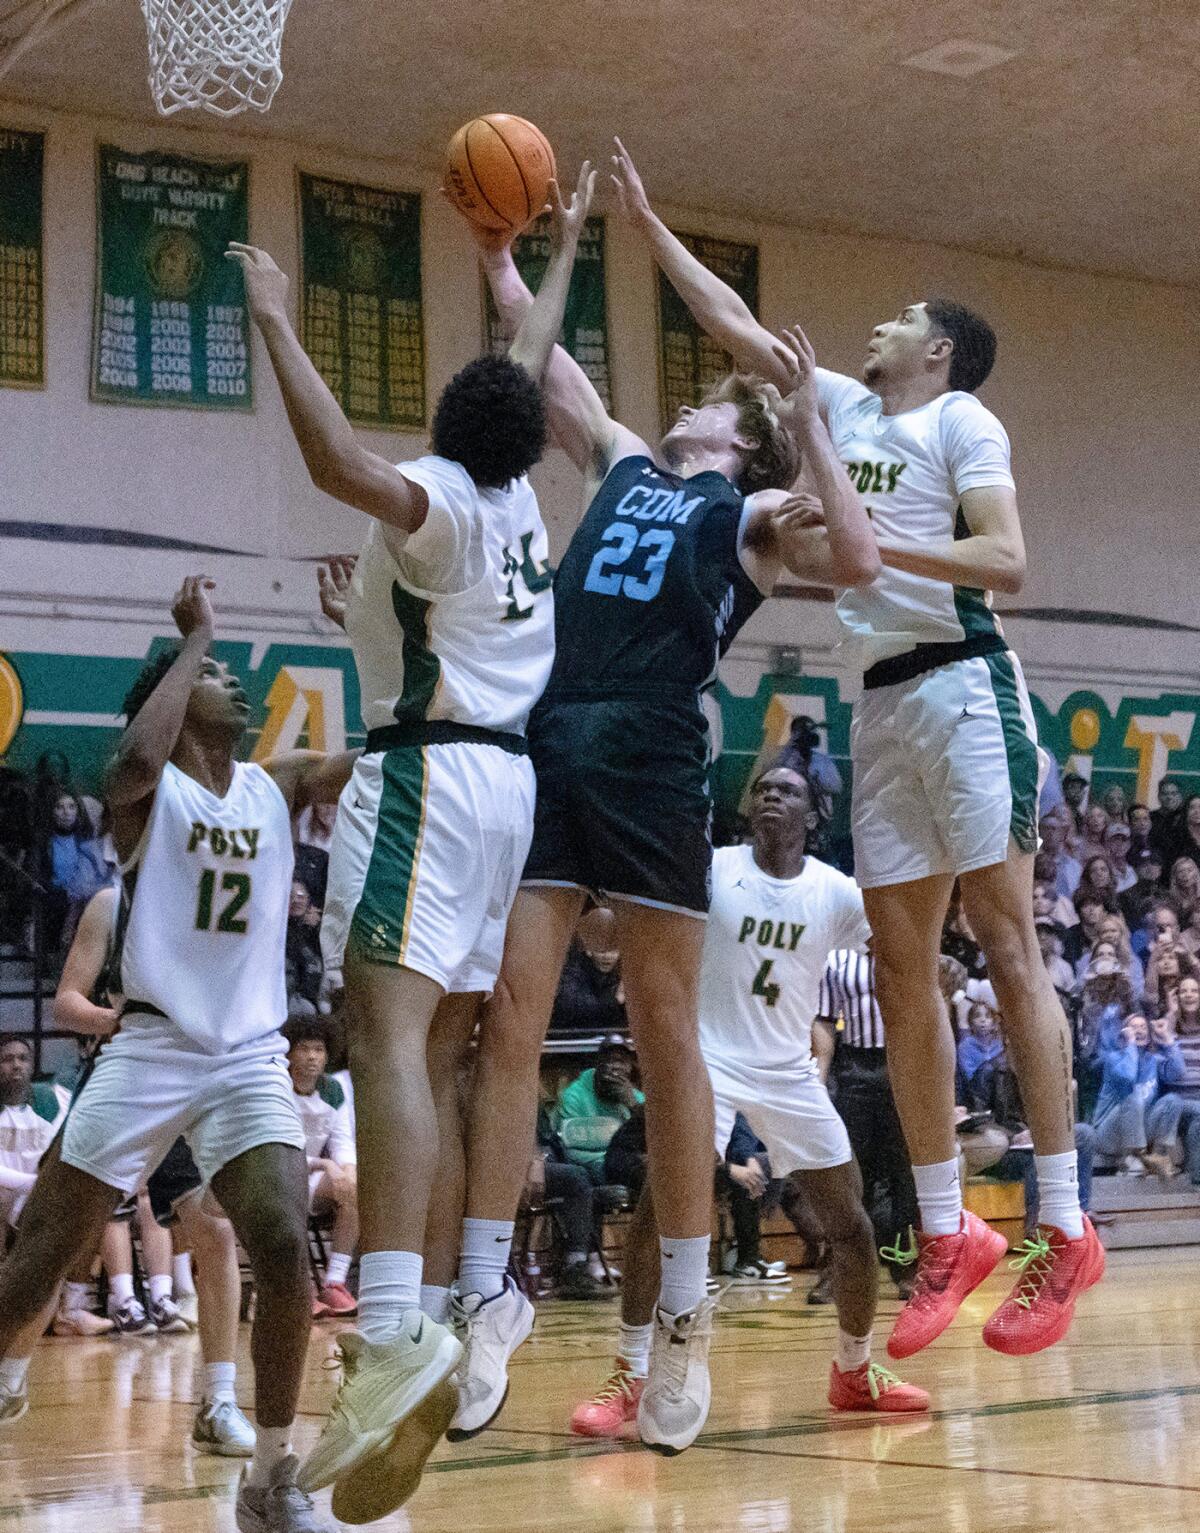 CdM junior forward Jackson Harlan battles for a rebound against two Long Beach Poly players on Friday night.